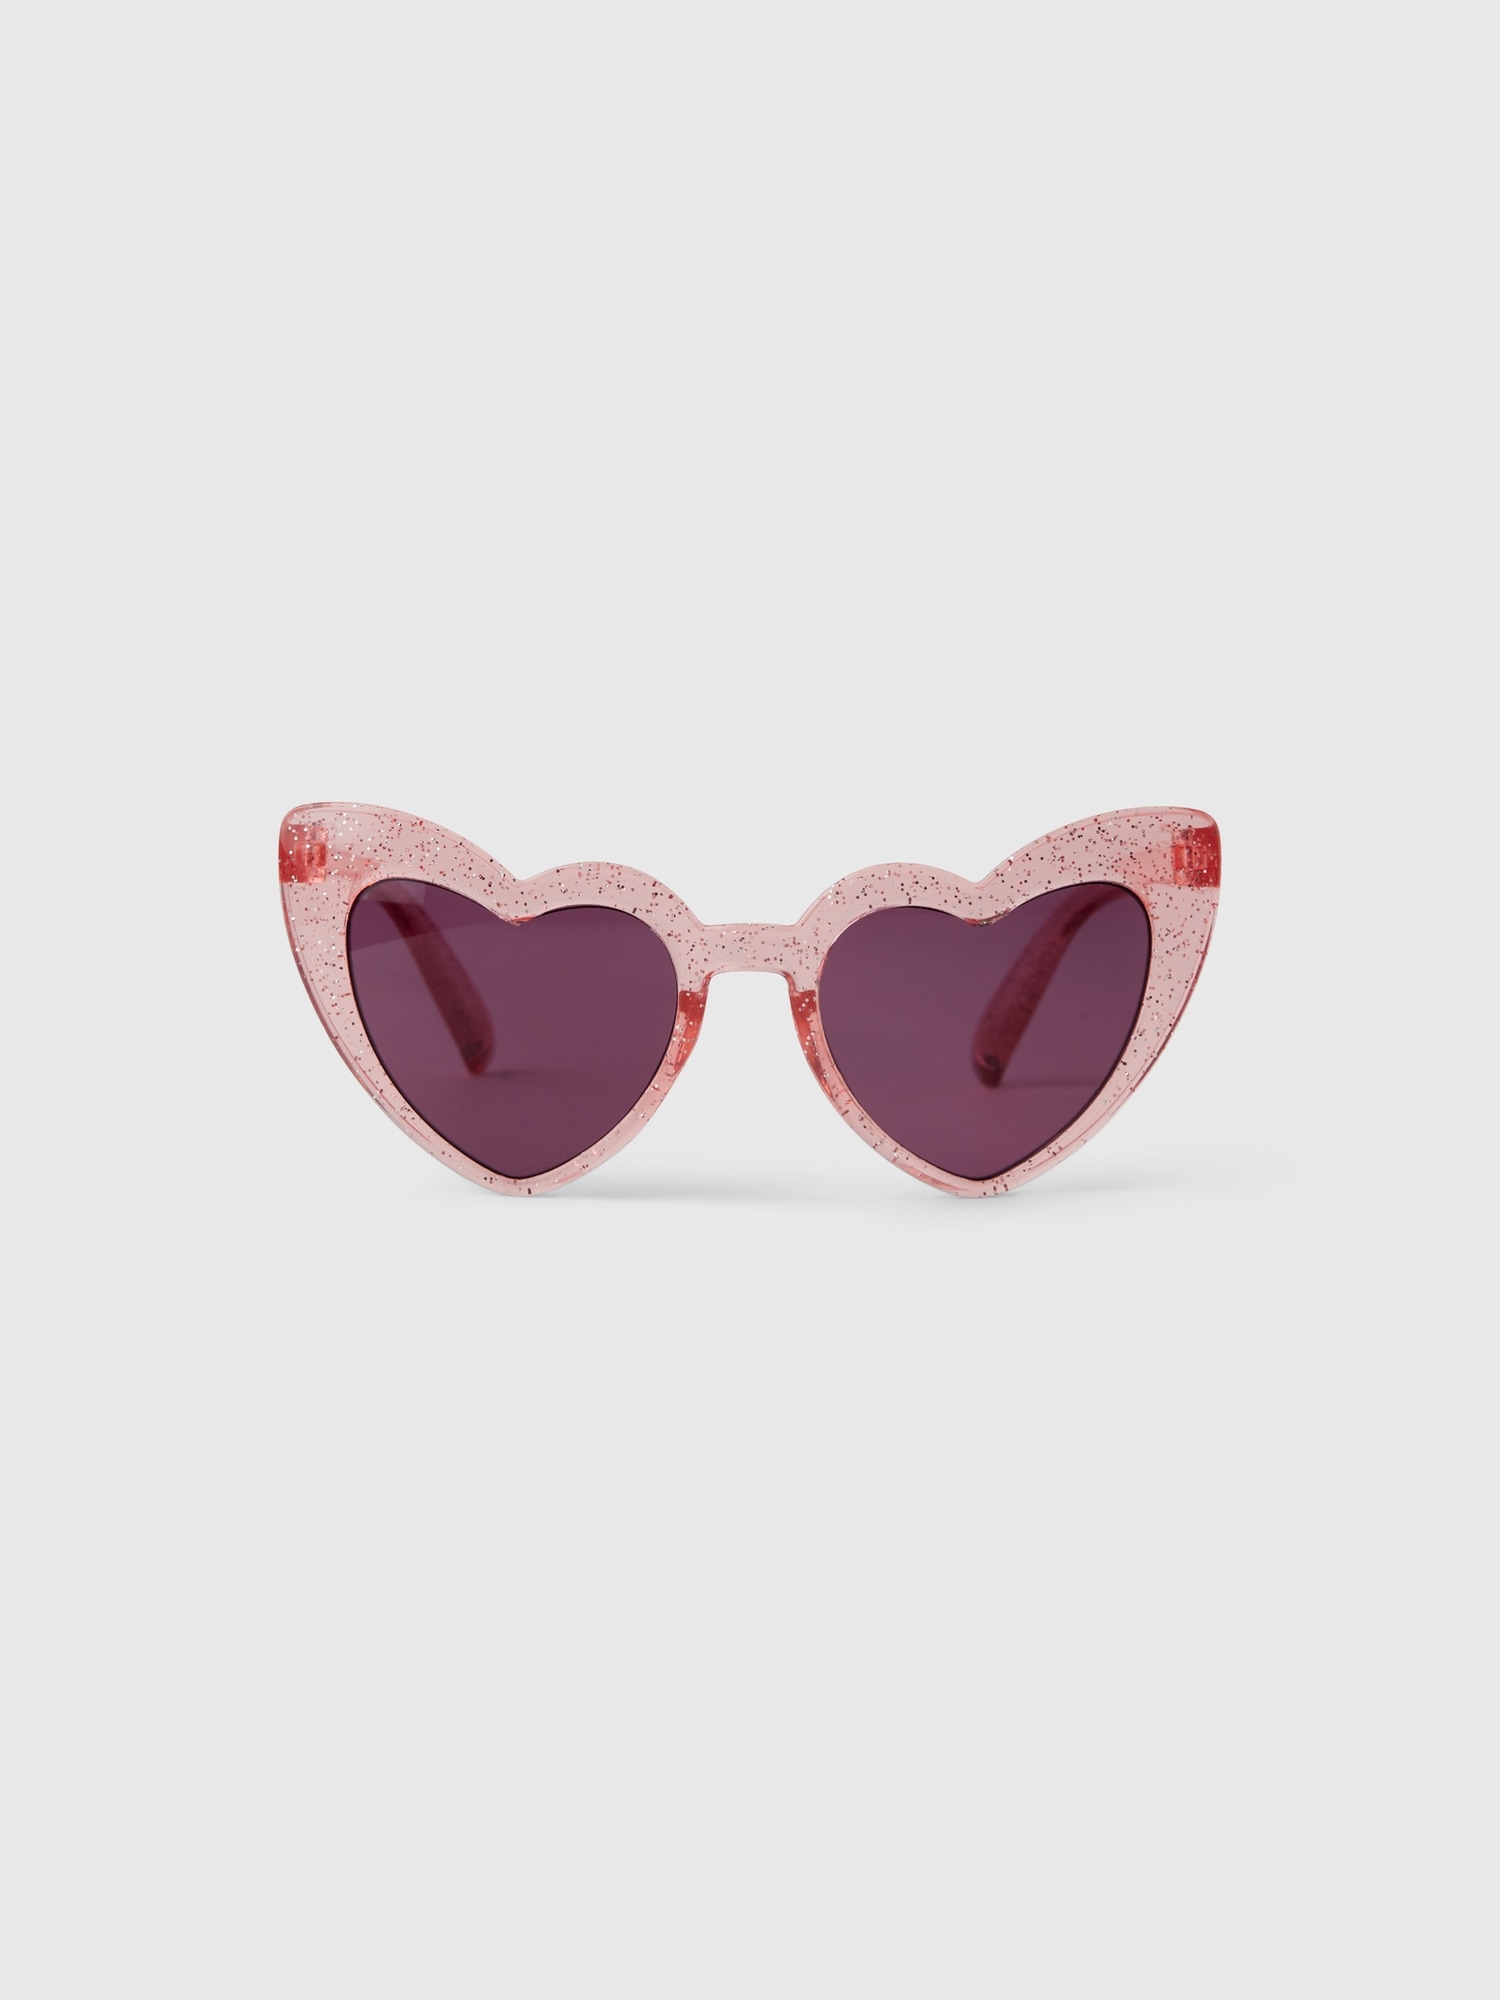 Gap Babies' Toddler Sunglasses In Pink Hearts